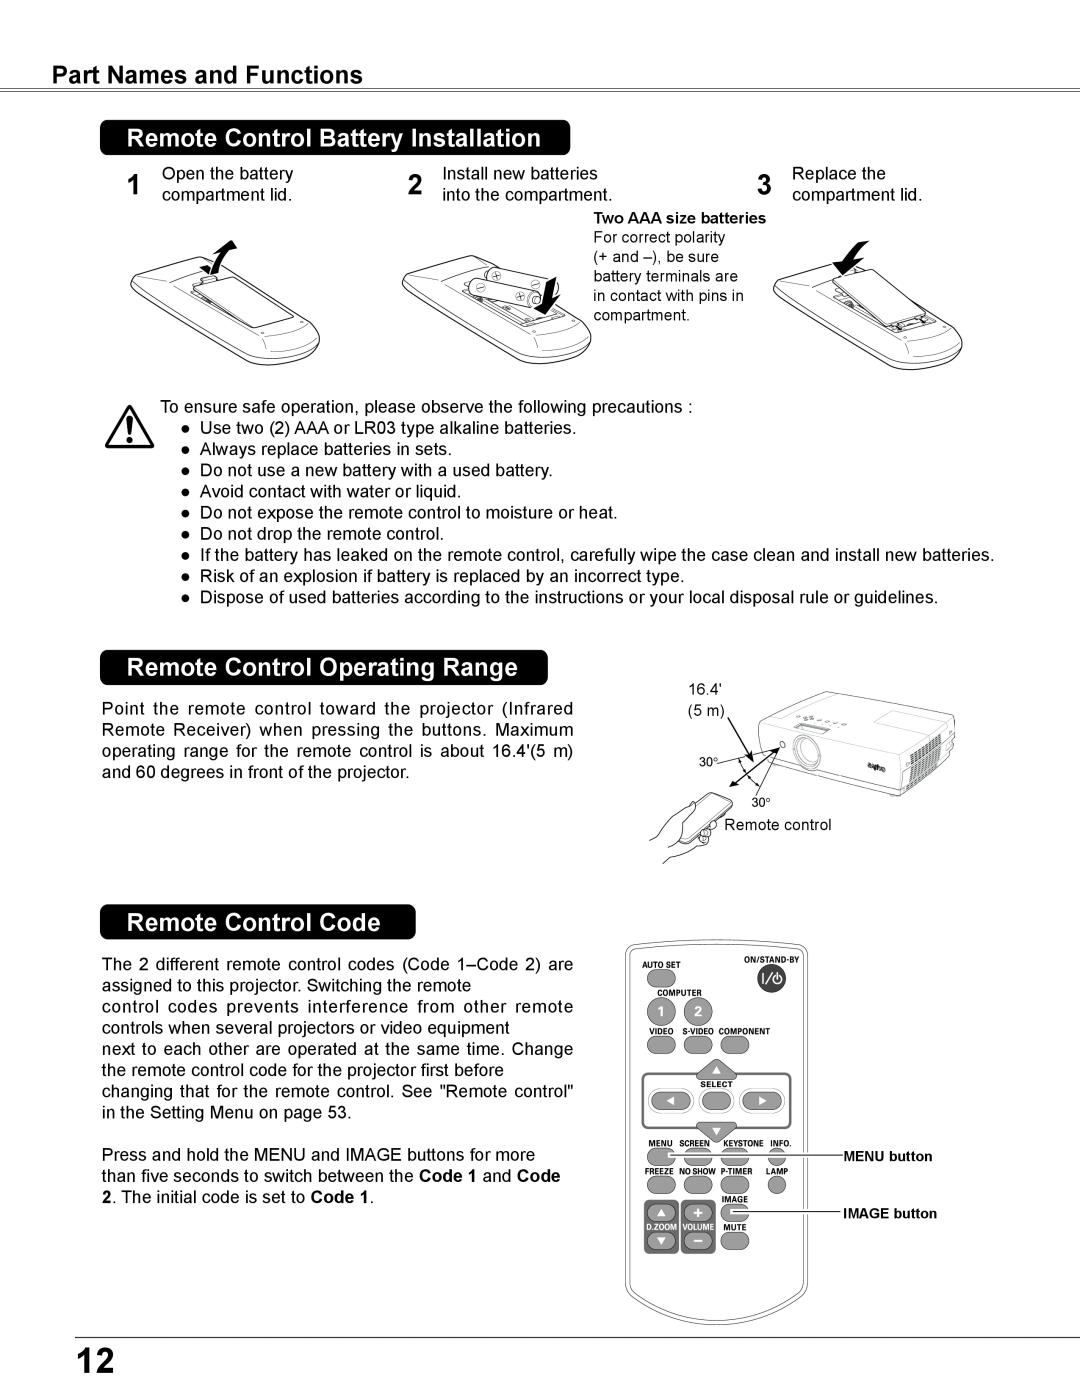 Sanyo PLC-XC56 owner manual Remote Control Battery Installation, Remote Control Operating Range, Remote Control Code 